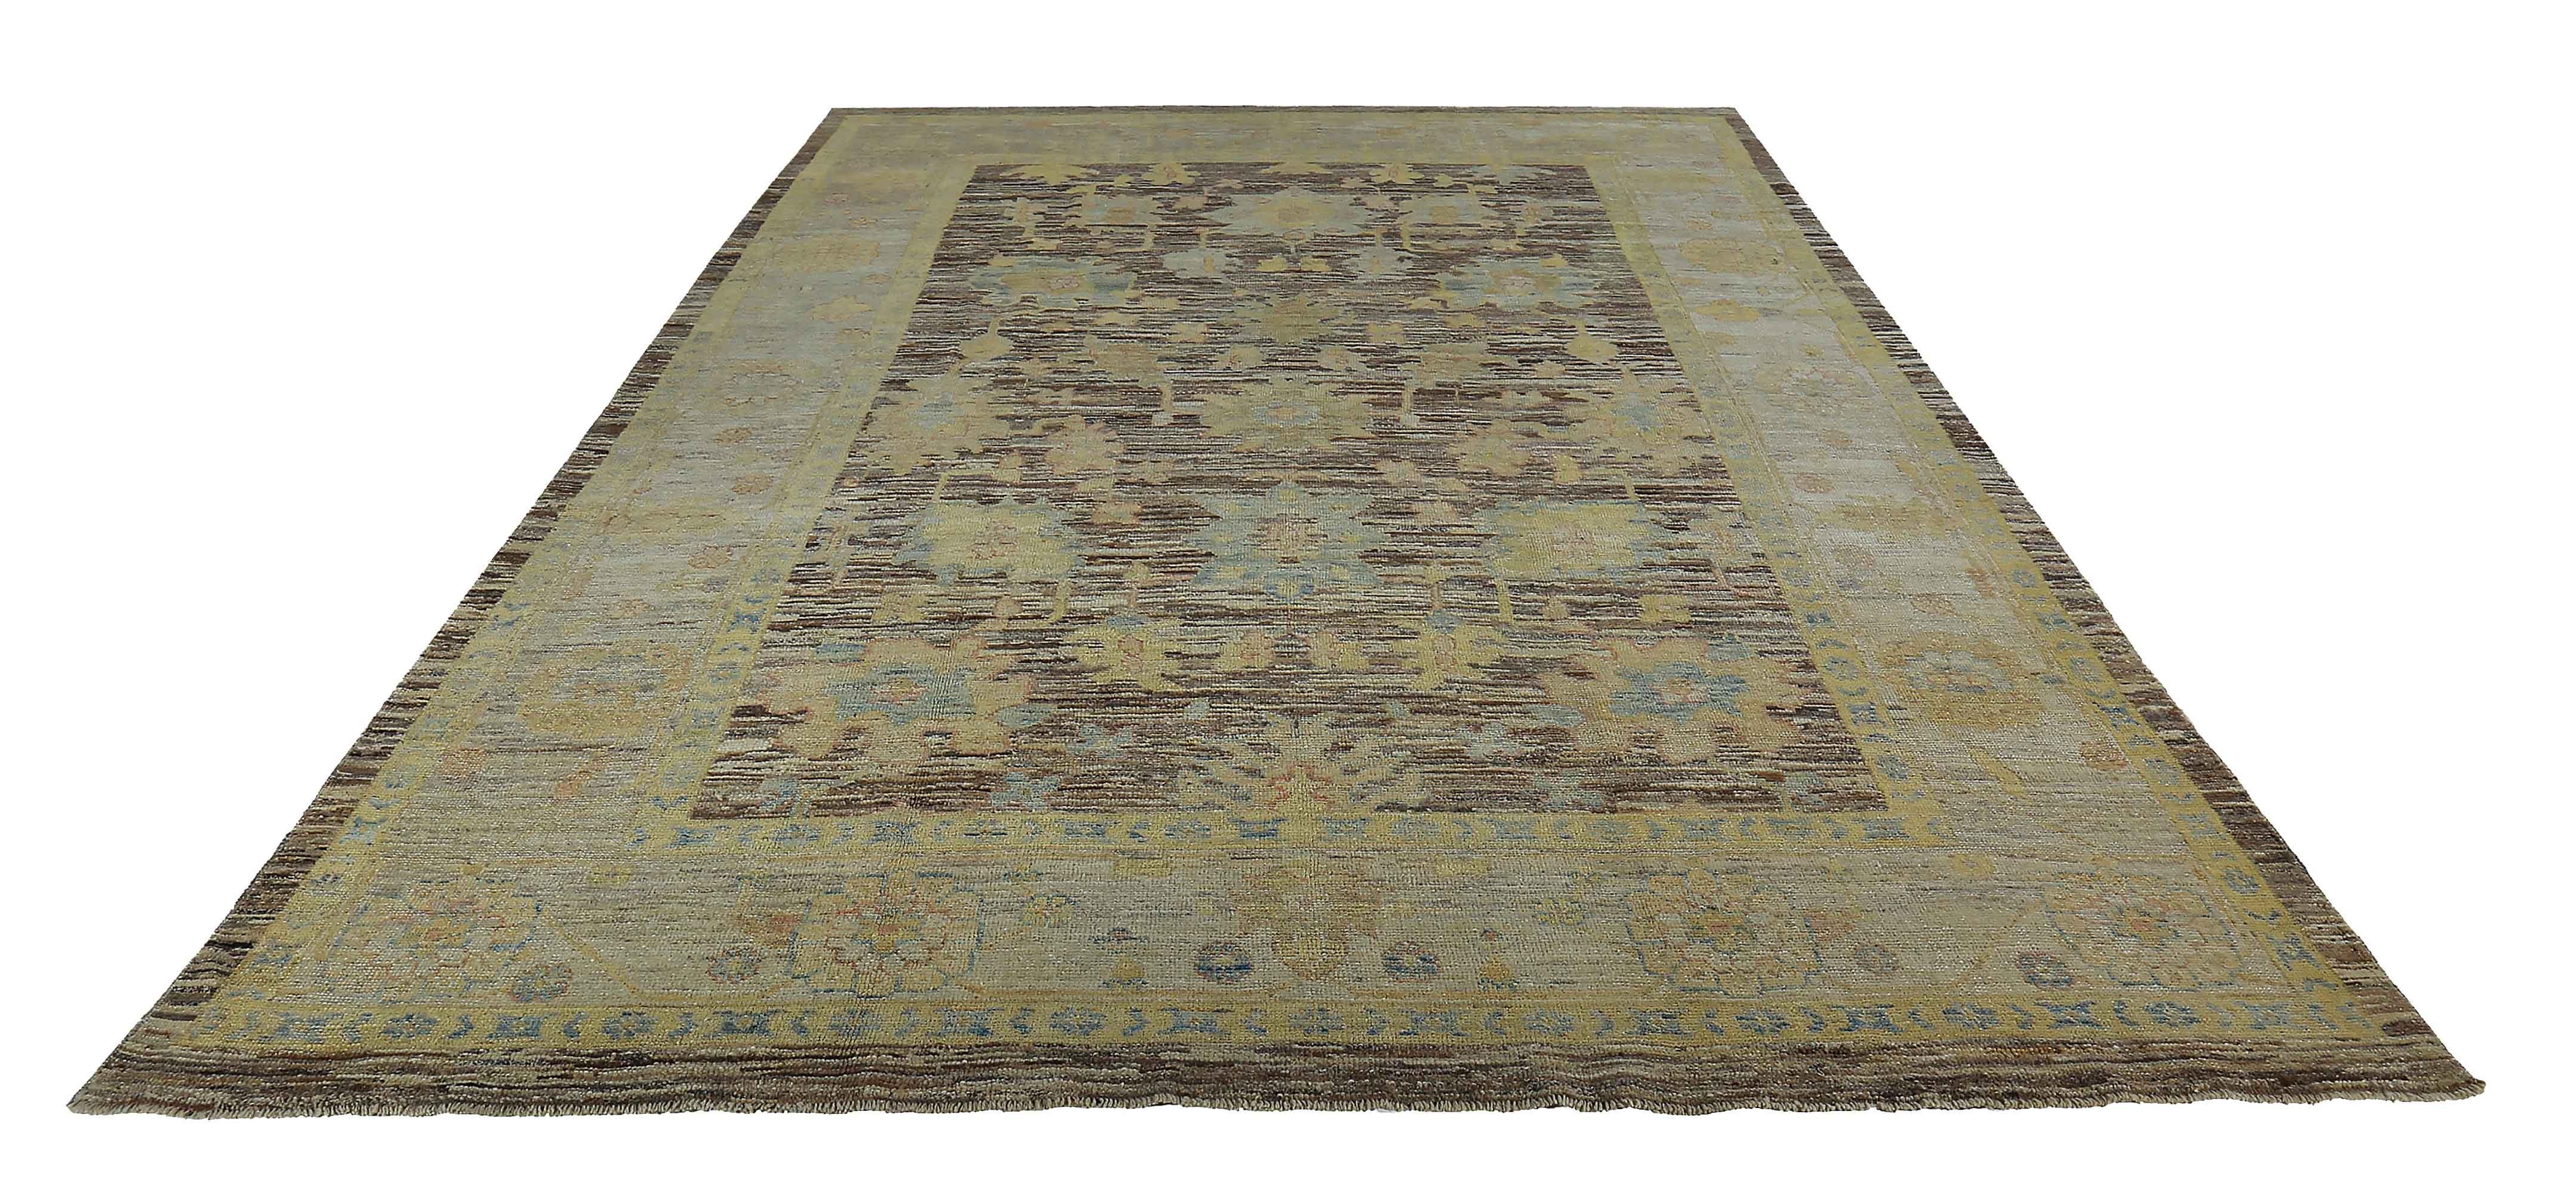 Contemporary Turkish rug made of handwoven sheep’s wool of the finest quality. It’s colored with organic vegetable dyes that are certified safe for humans and pets alike. It features ivory and gold floral details on a rich brown field. Flower